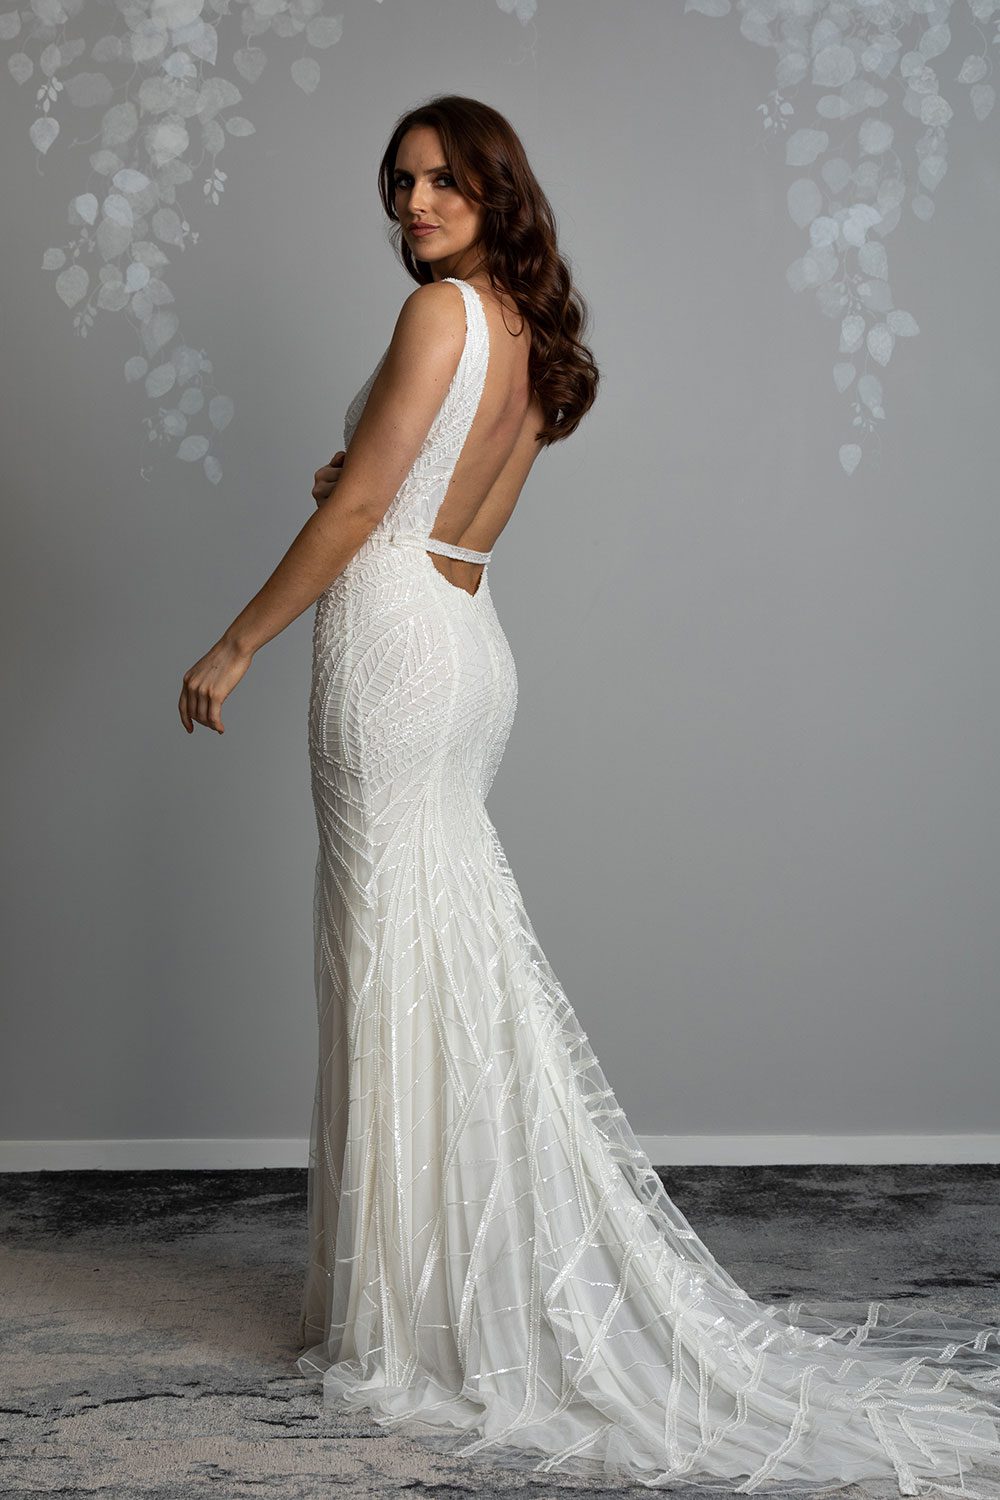 Elle Wedding gown from Vinka Design - Wedding dress with illusion neckline and deep plunge in the front with low back. Stunning beaded embroidery over a stretch base that sculpts and flatters the figure and falls into a beautiful flared train. Semi profile of dress with low back and stunning long train with beaded embroidery throughout